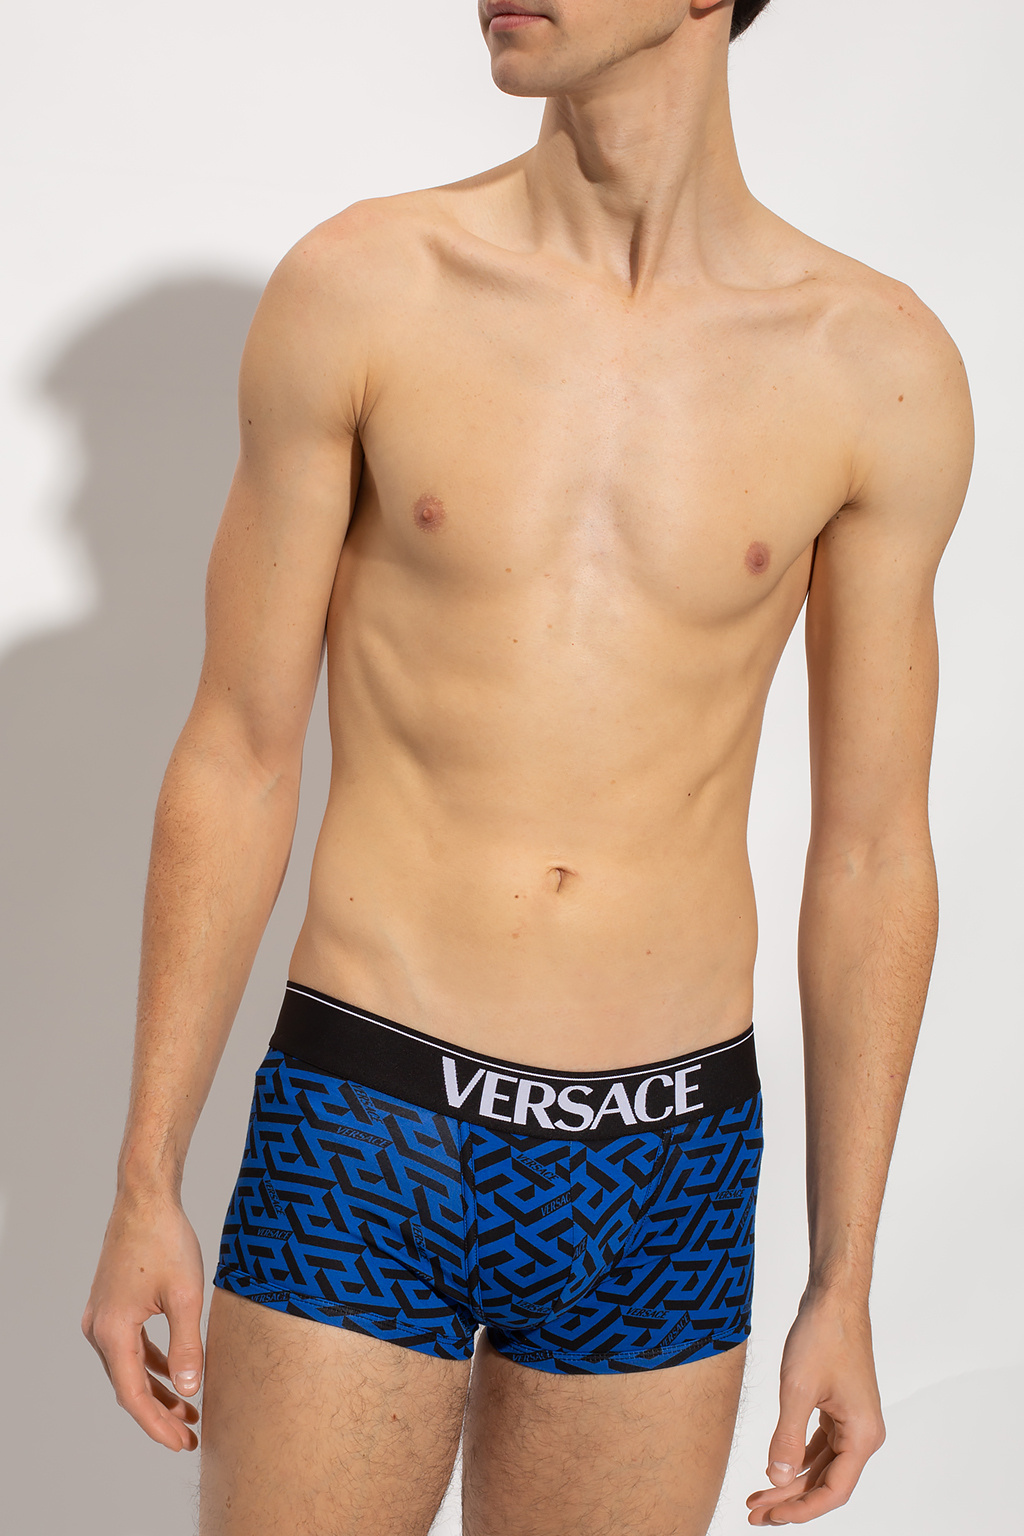 Versace Discover the collection